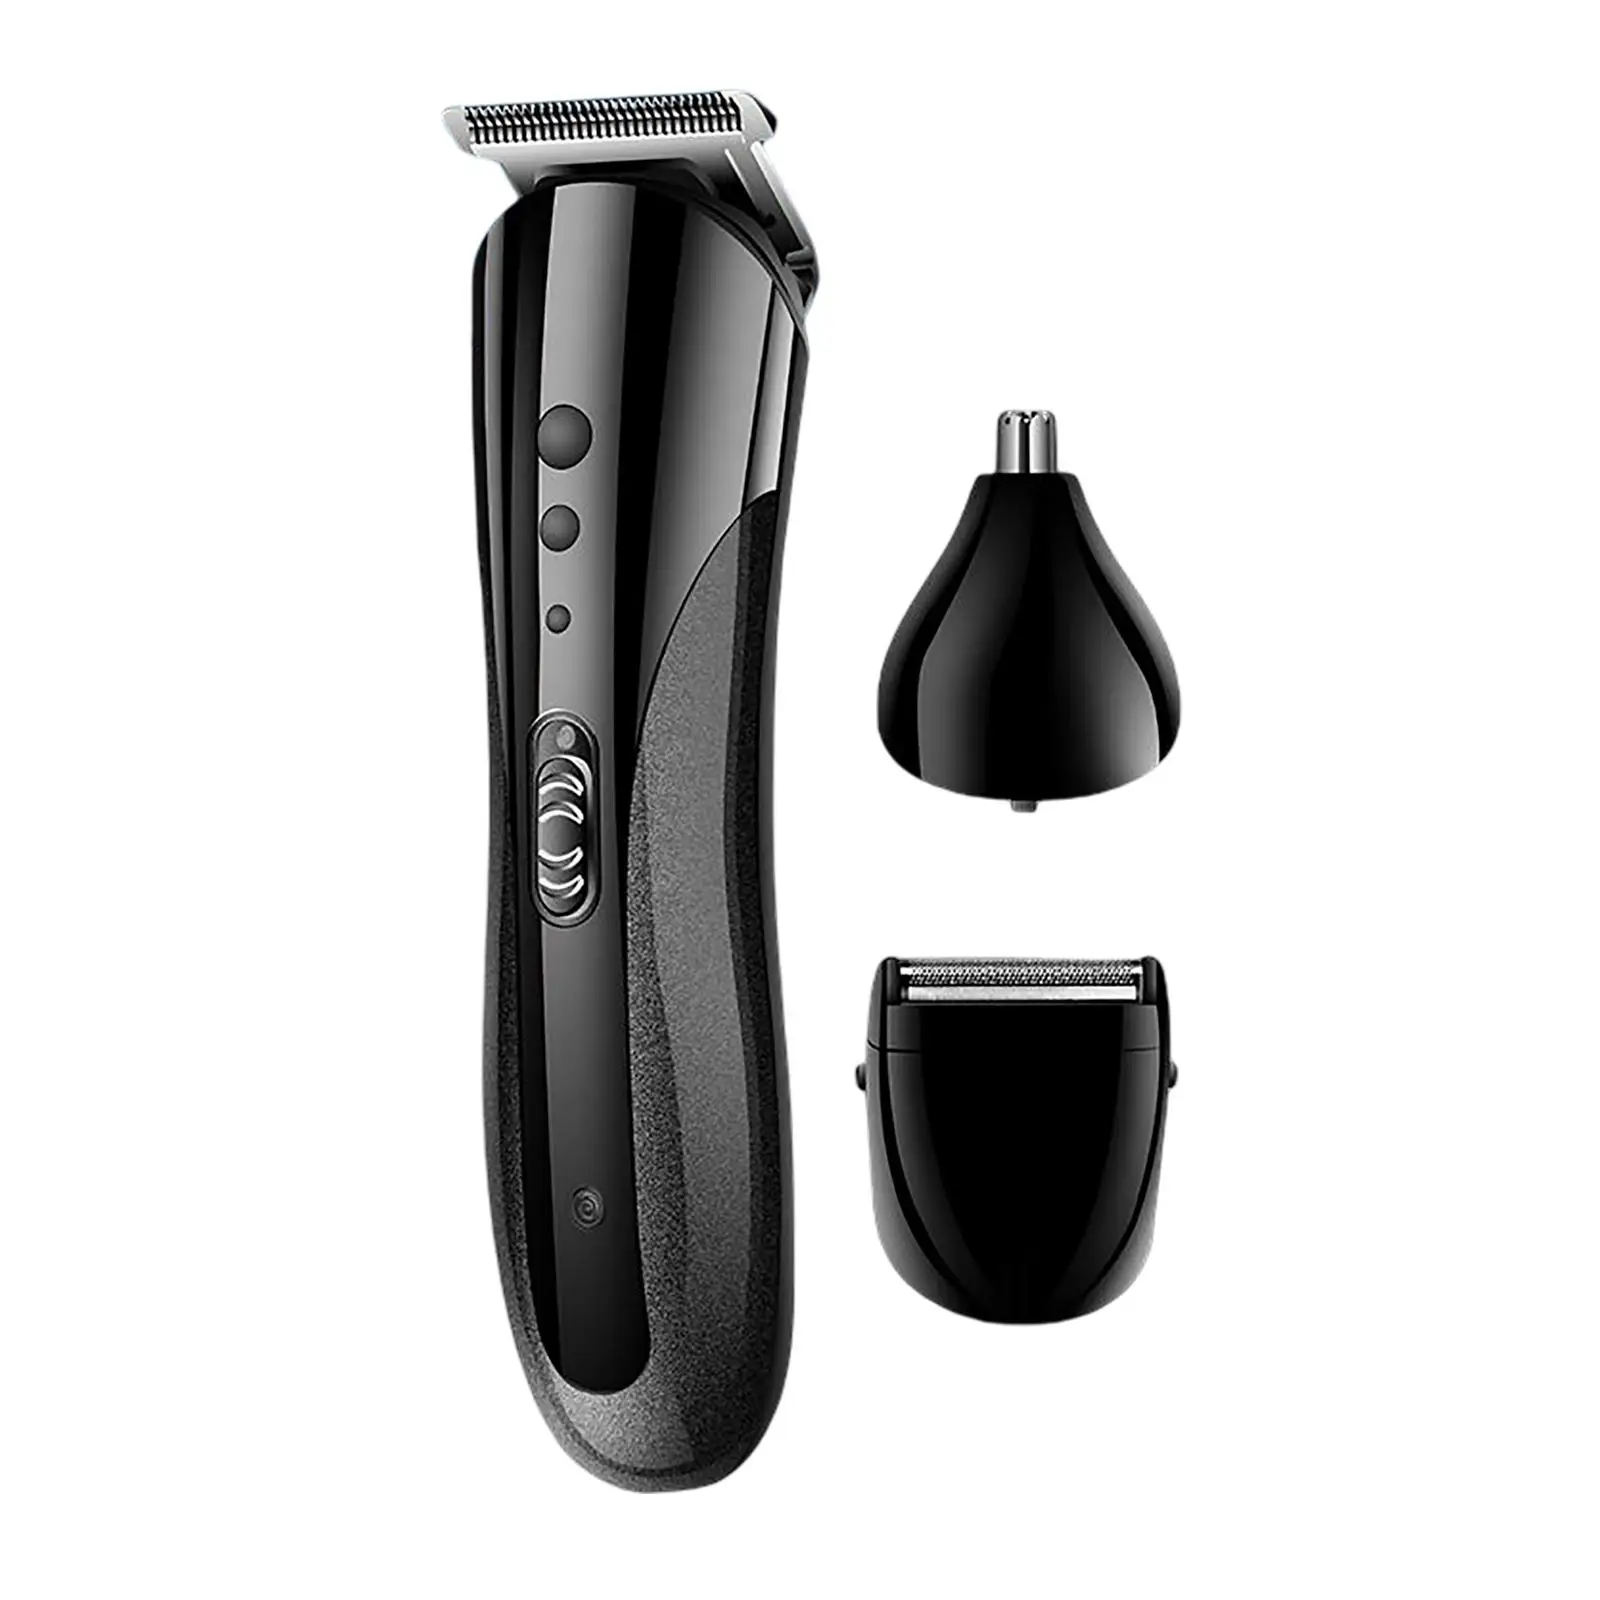 Cordless Beard Trimmer Hair Clippers USB Rechargeable Facial Professional Hair Shaver Barber Tool Dad Gifts Hair Grooming Kit EU